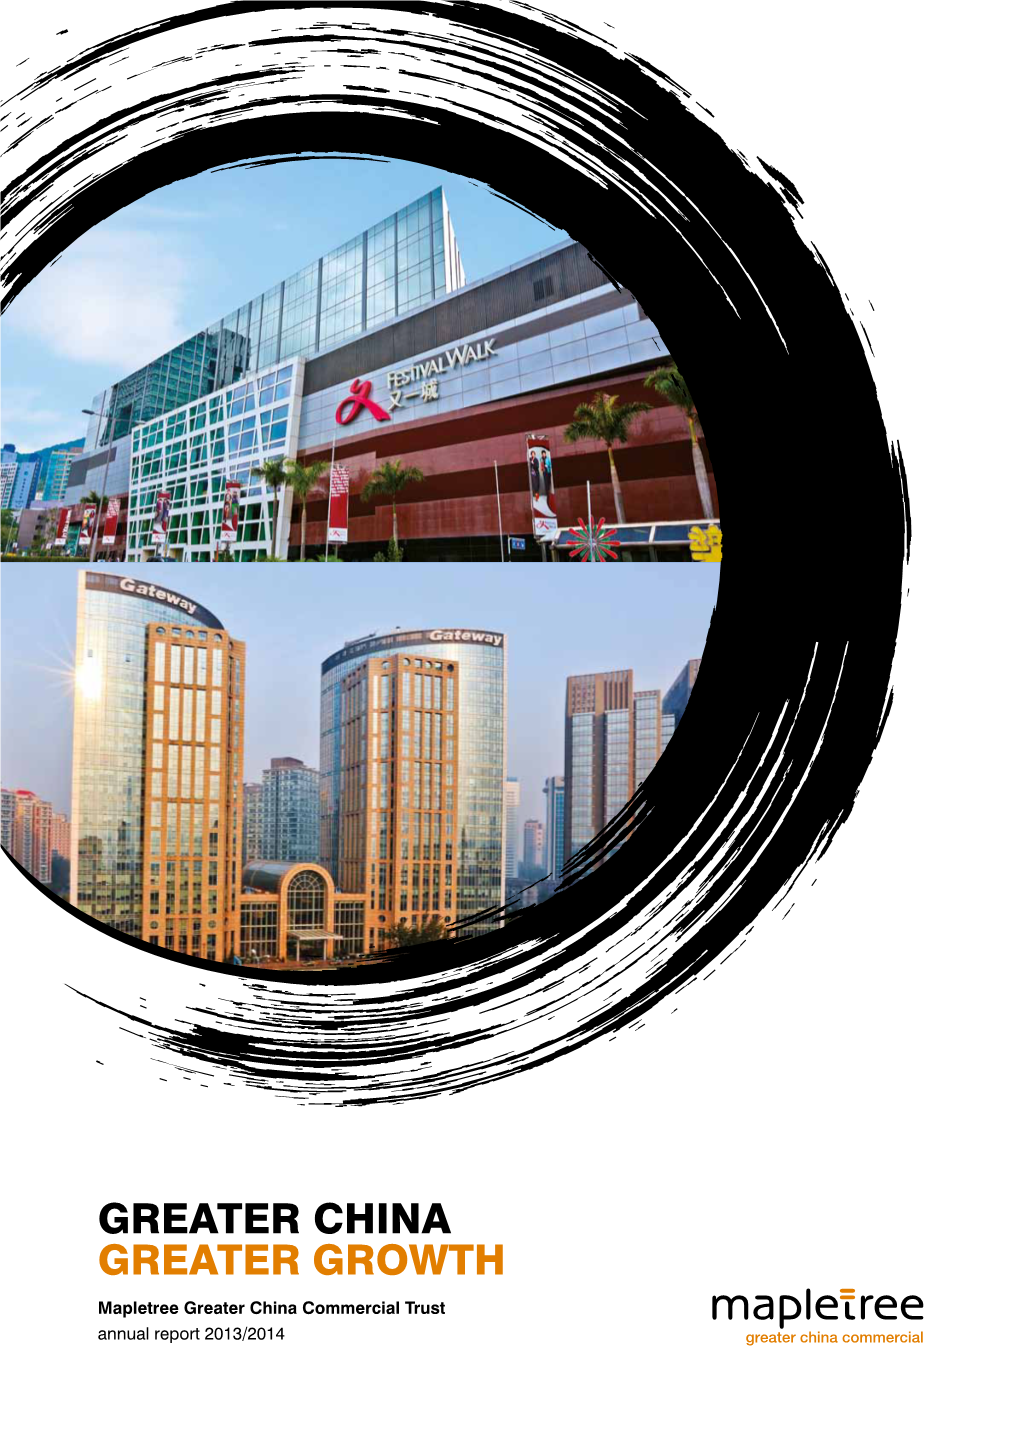 GREATER CHINA GREATER GROWTH Mapletree Greater China Commercial Trust Annual Report 2013/2014 CORPORATE PROFILE